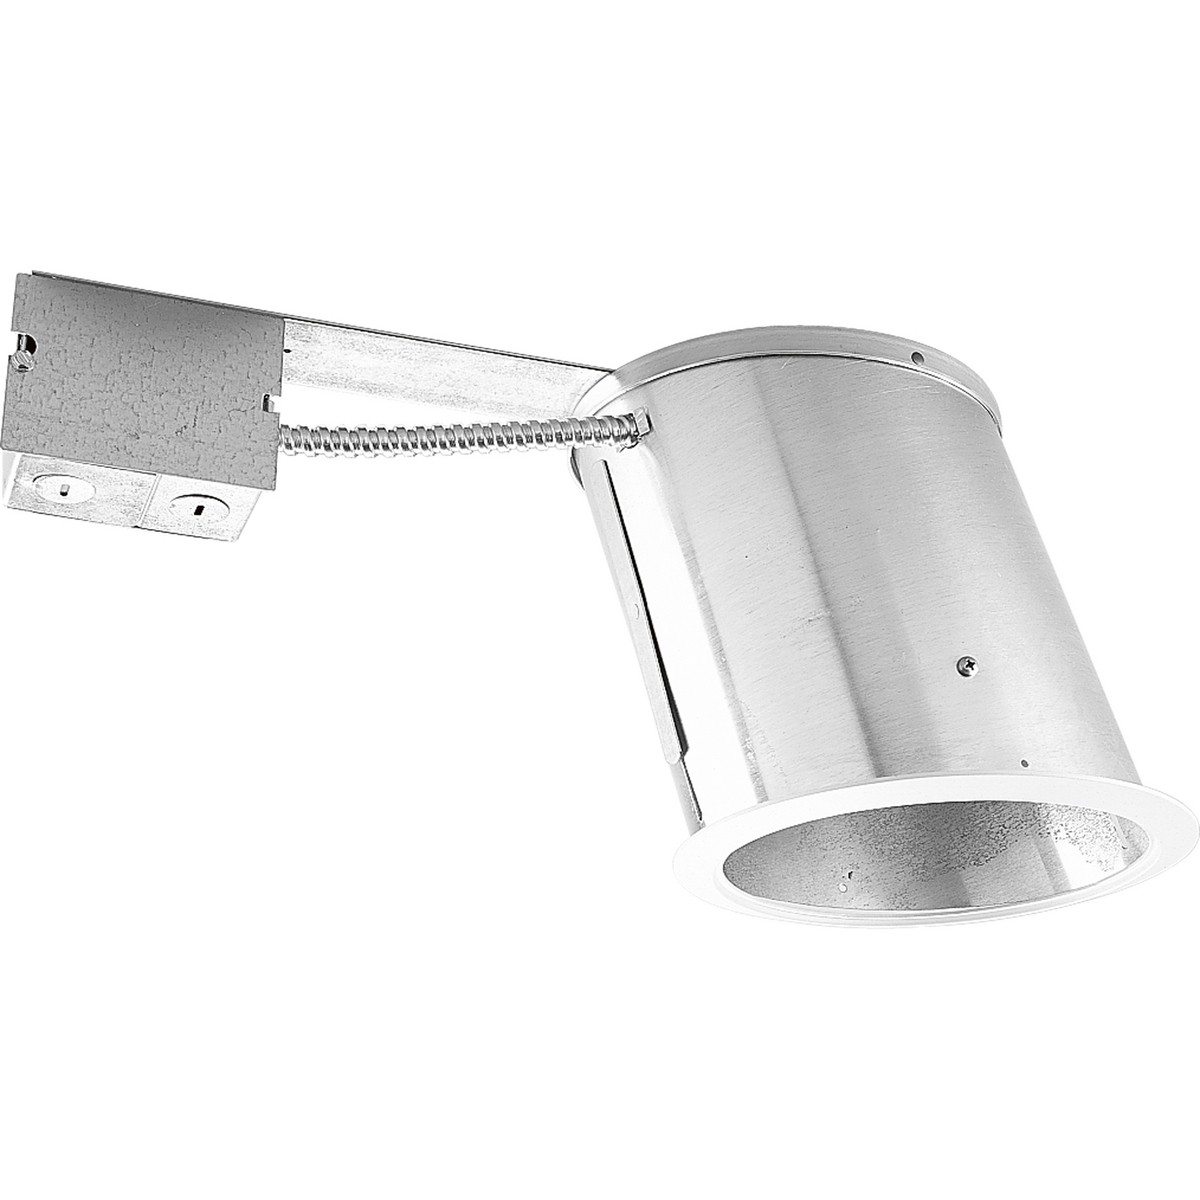 6 in Slope Remodel Housing Incandescent that features one housing that adjusts lamp from 9 to 45 degrees. One trim style for all ceiling angles and integral white cast trim flange ring provides for secure installation.